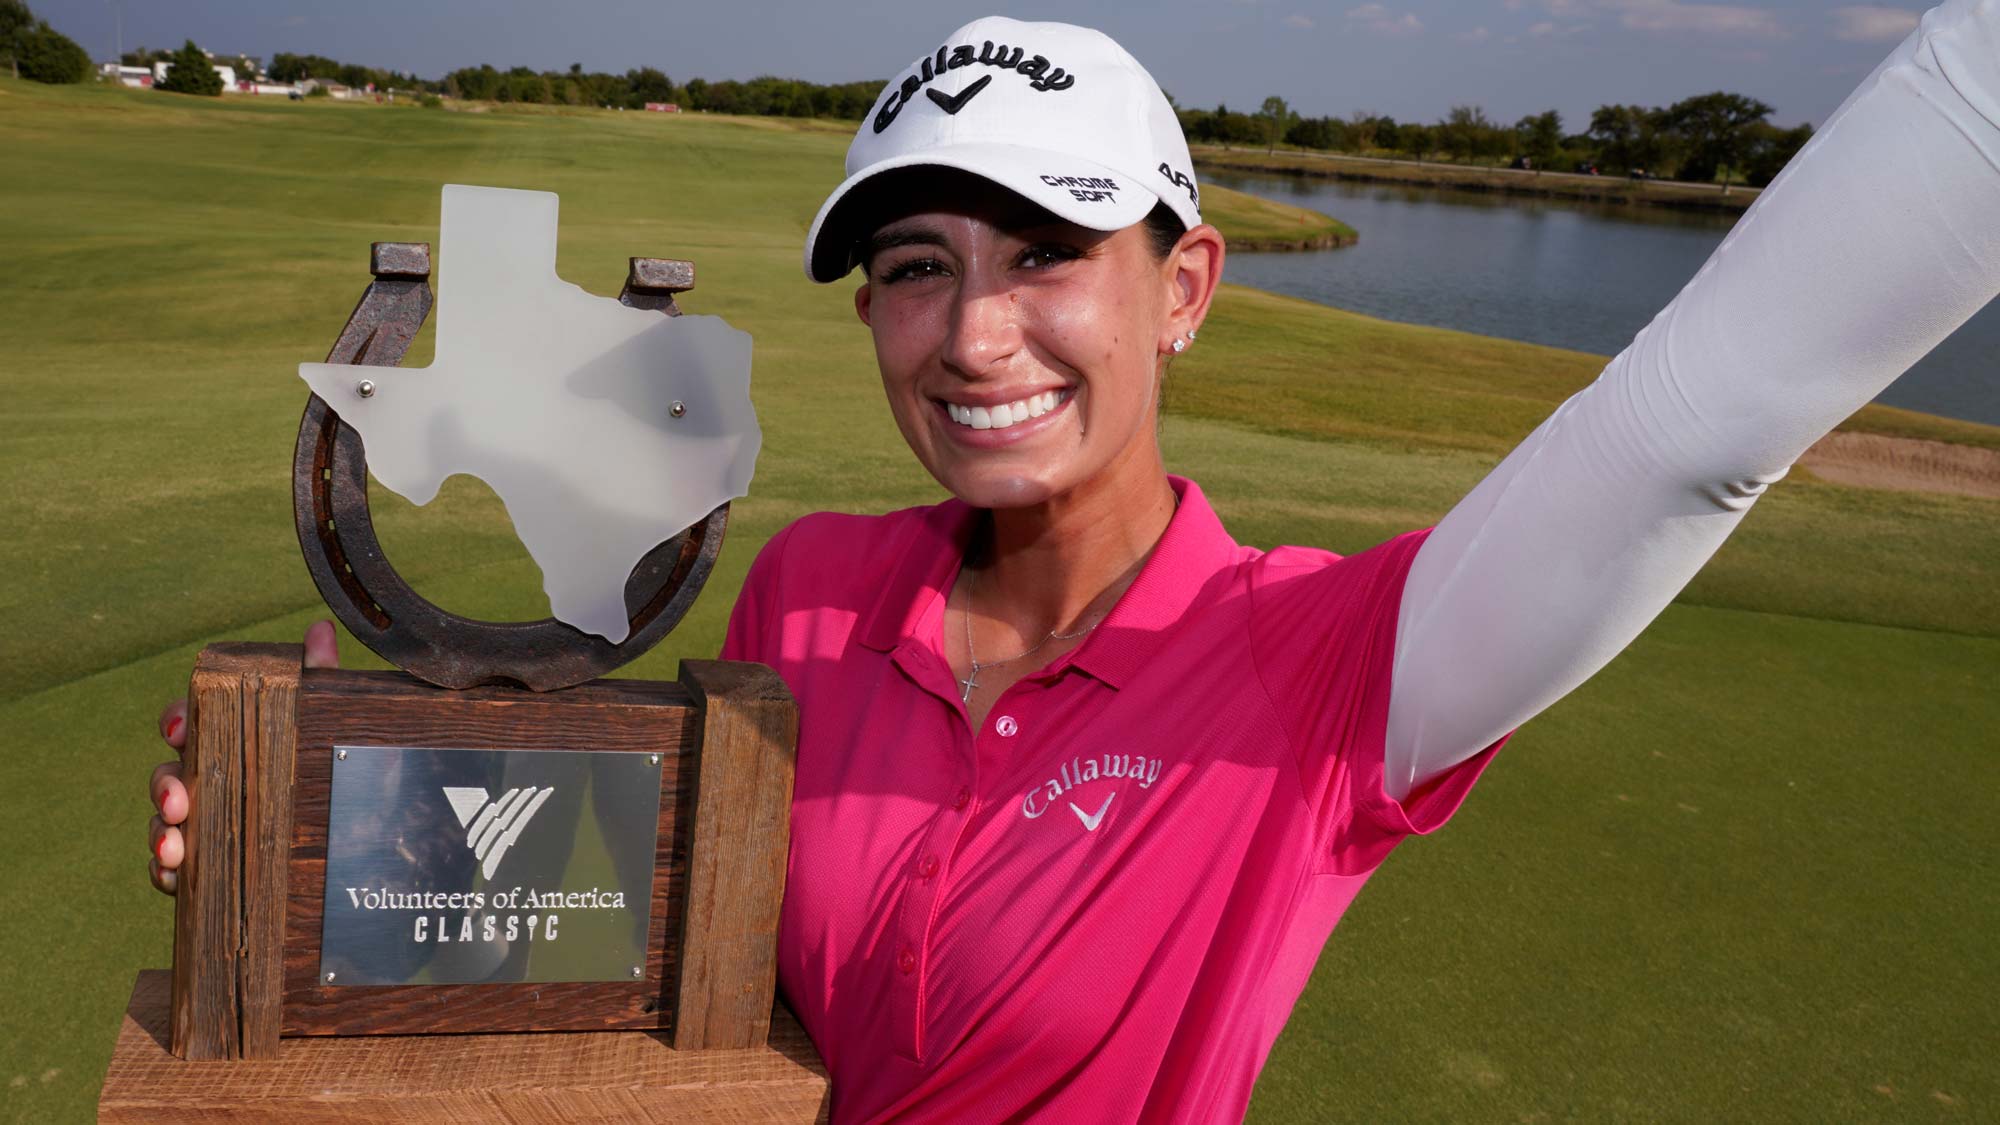 Cheyenne Knight has her #BagsPacked for the 2020 Diamond Resorts Tournament of Champions after her victory at the 2019 Volunteers of America Classic